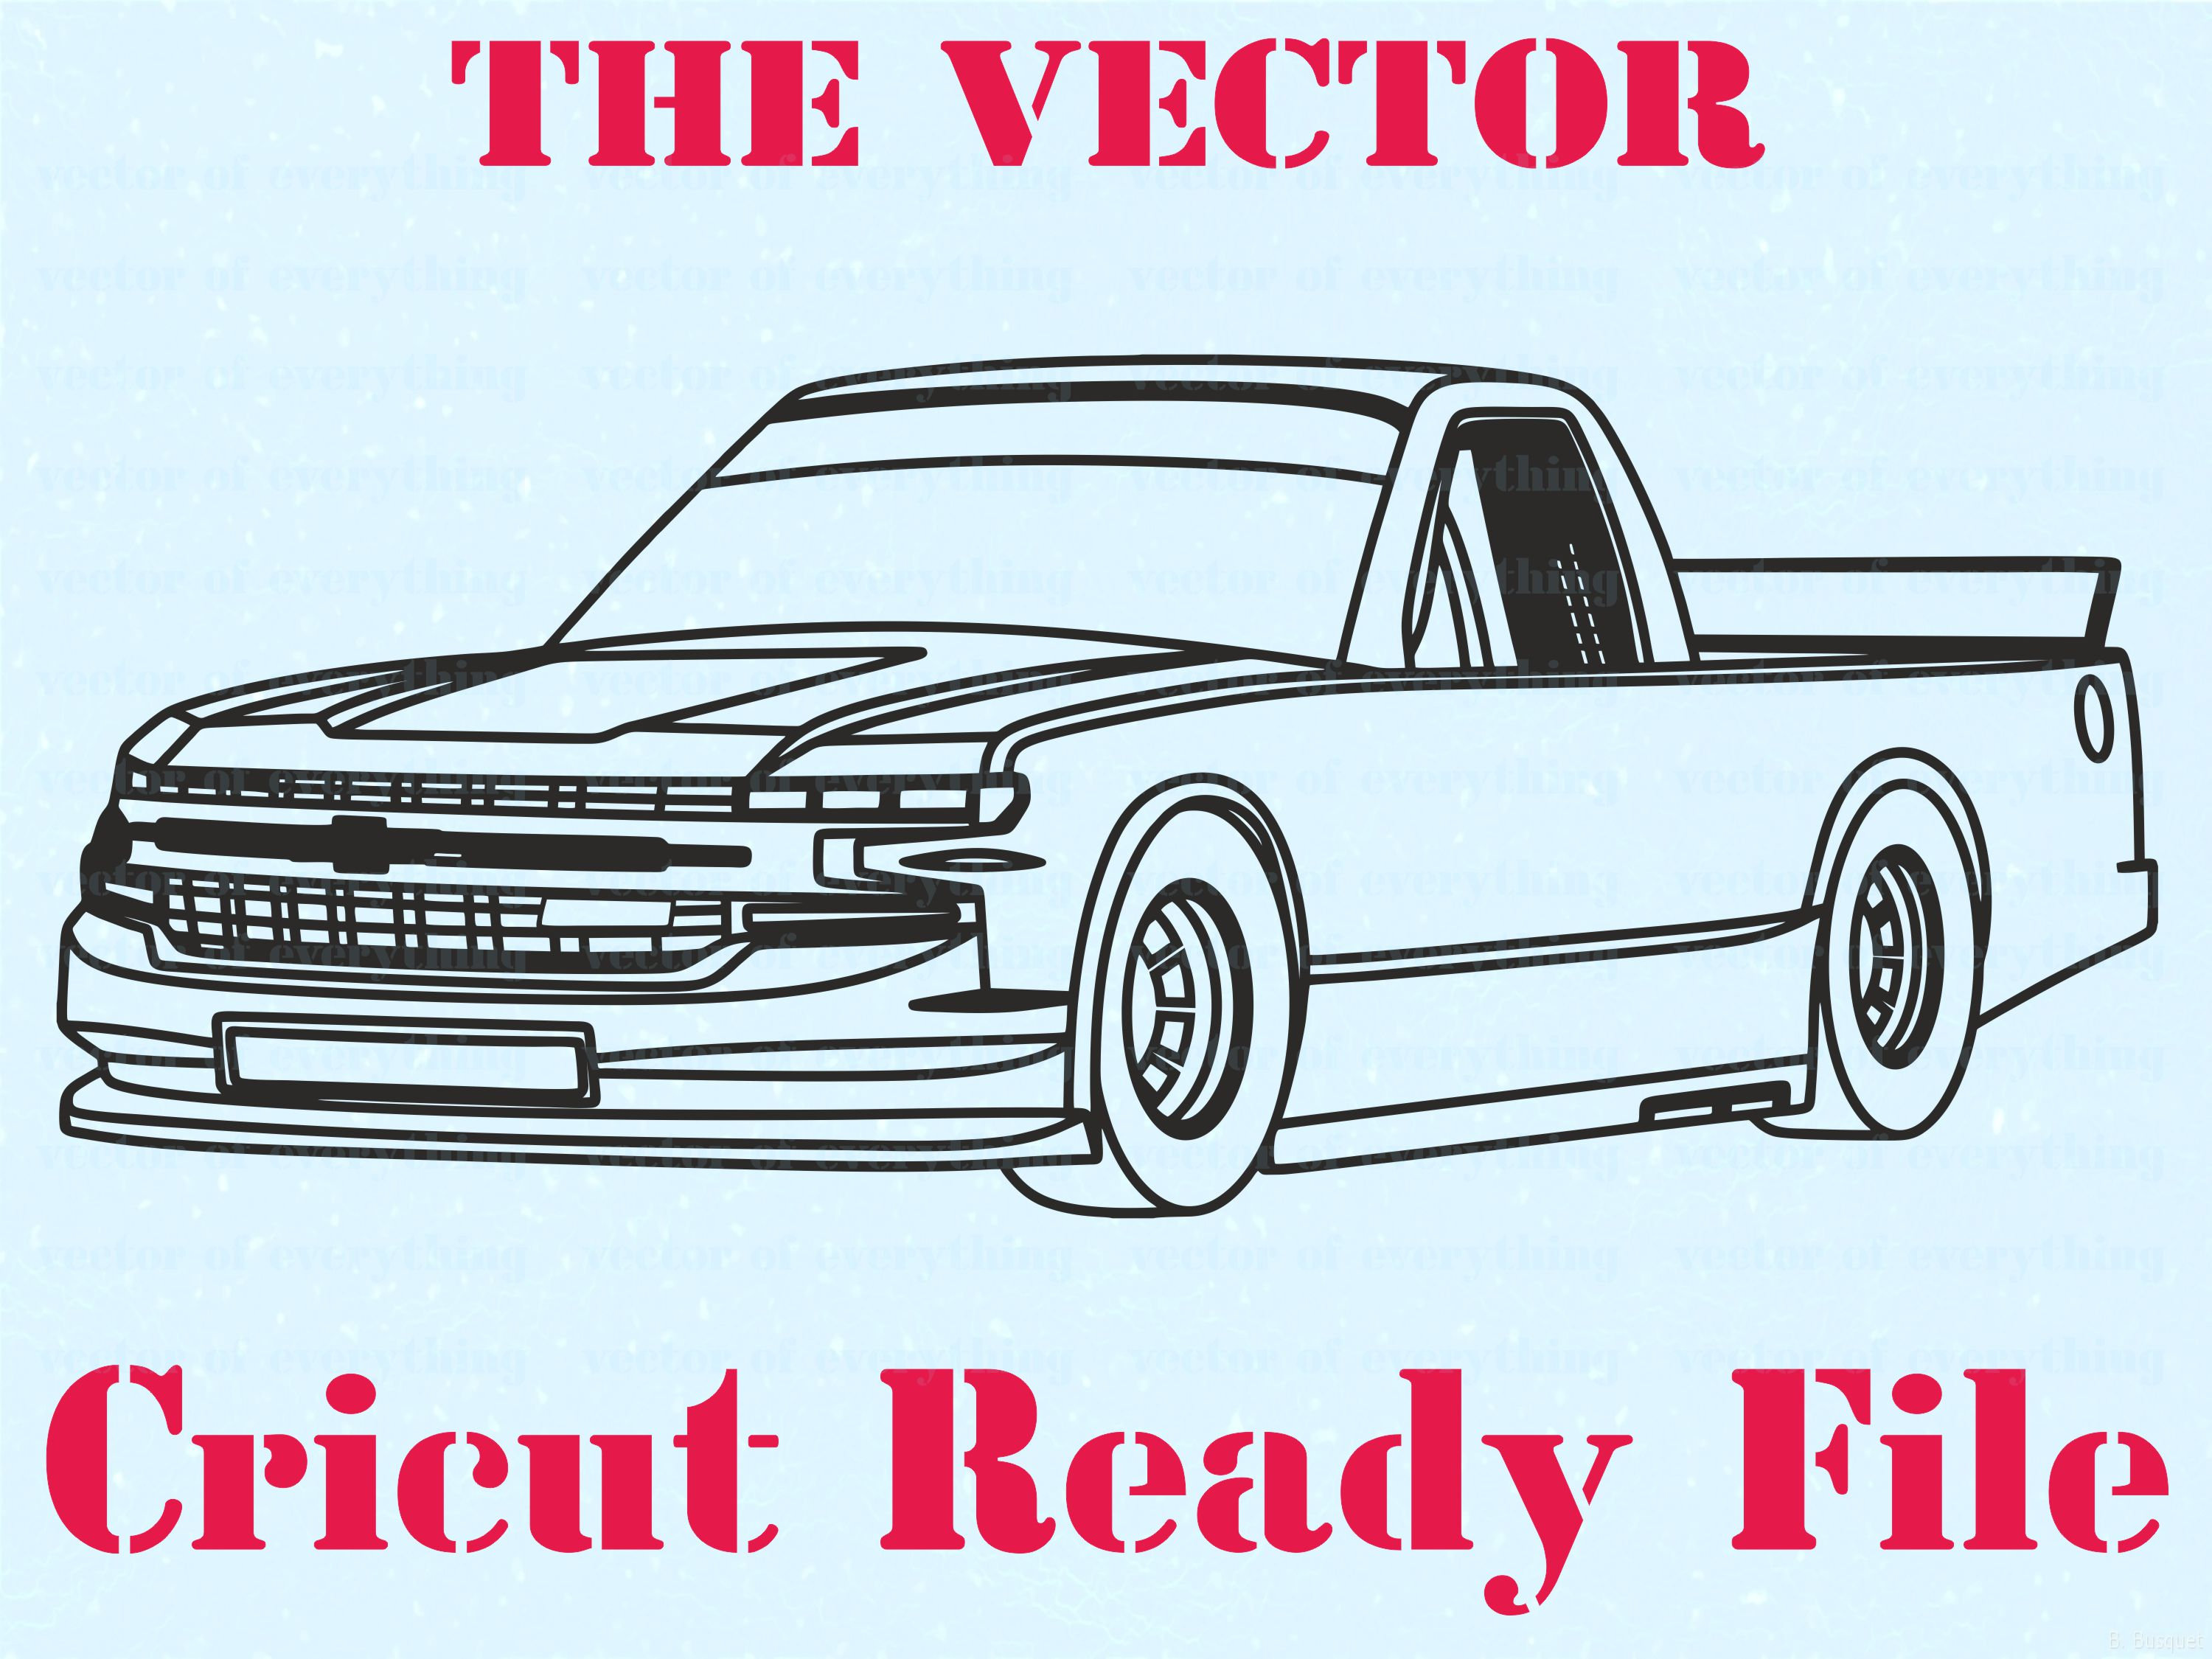 Chevrolet Corsa 1.6 Pick-Up vector drawing